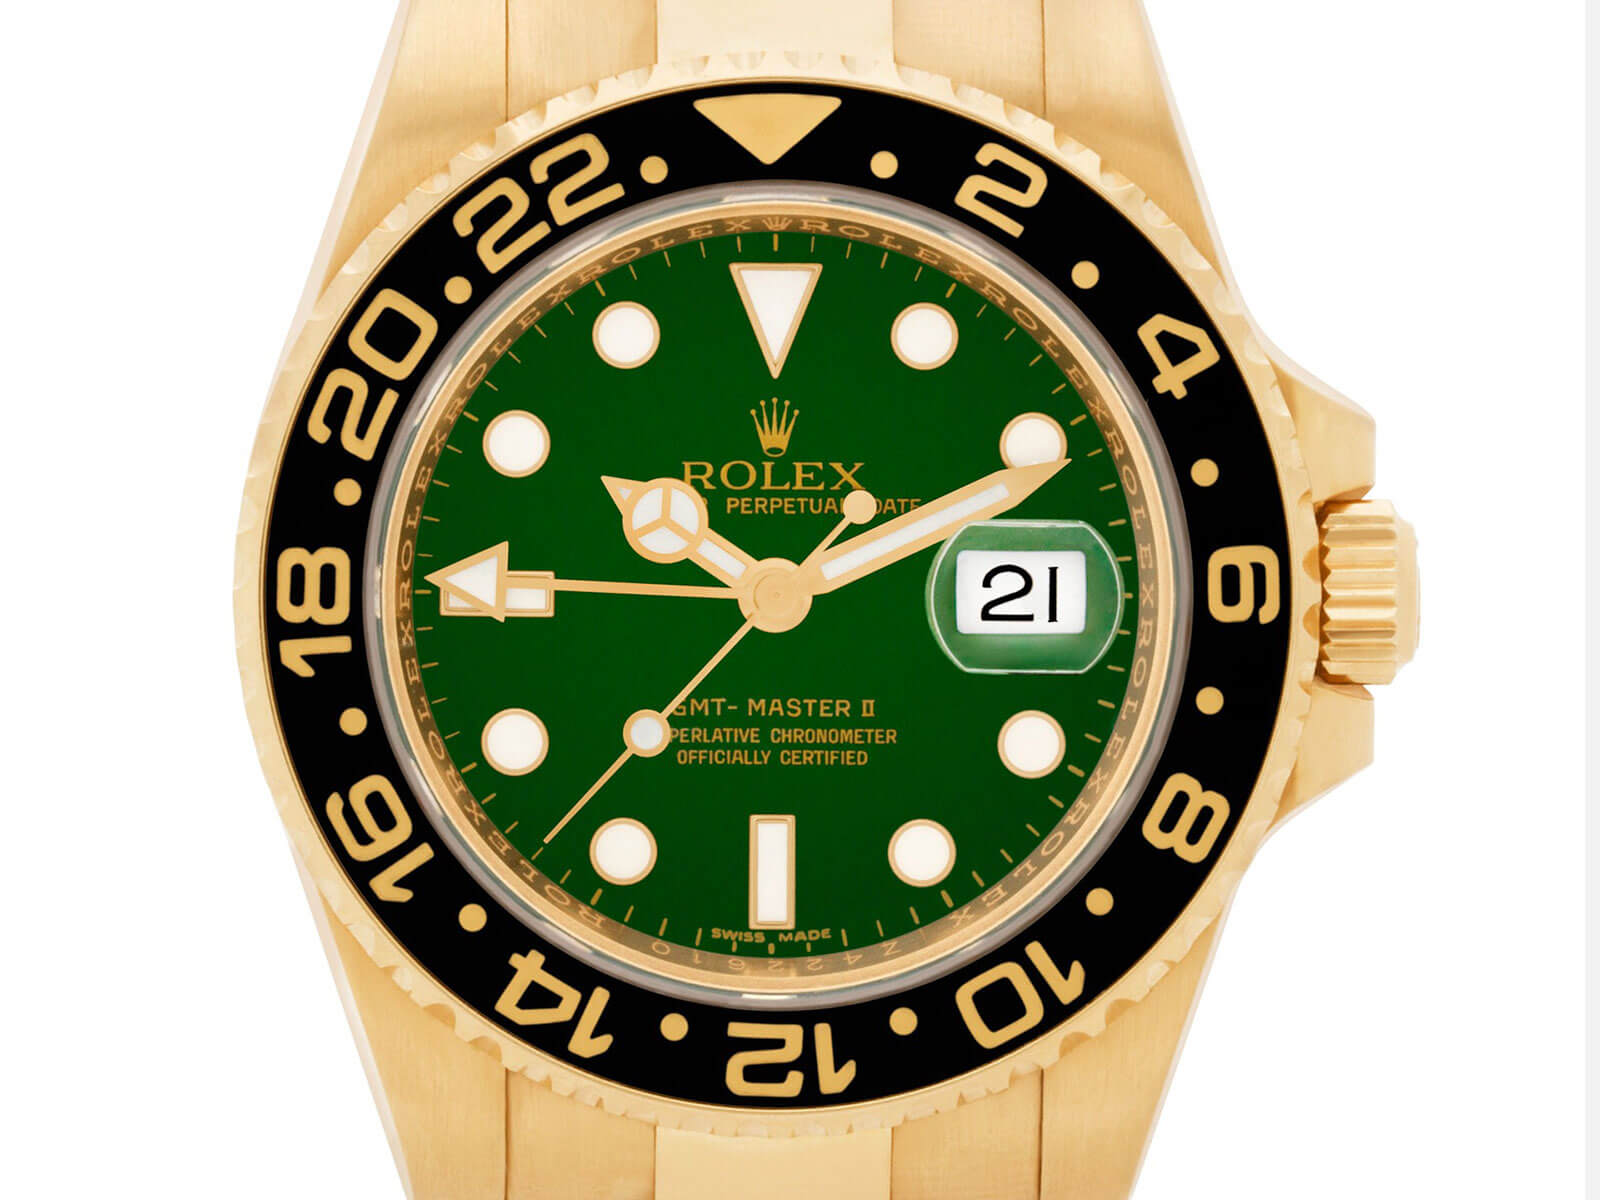 Rolex GMT-Master II 116718 is the first Rolex model with the Cerachrom Insert